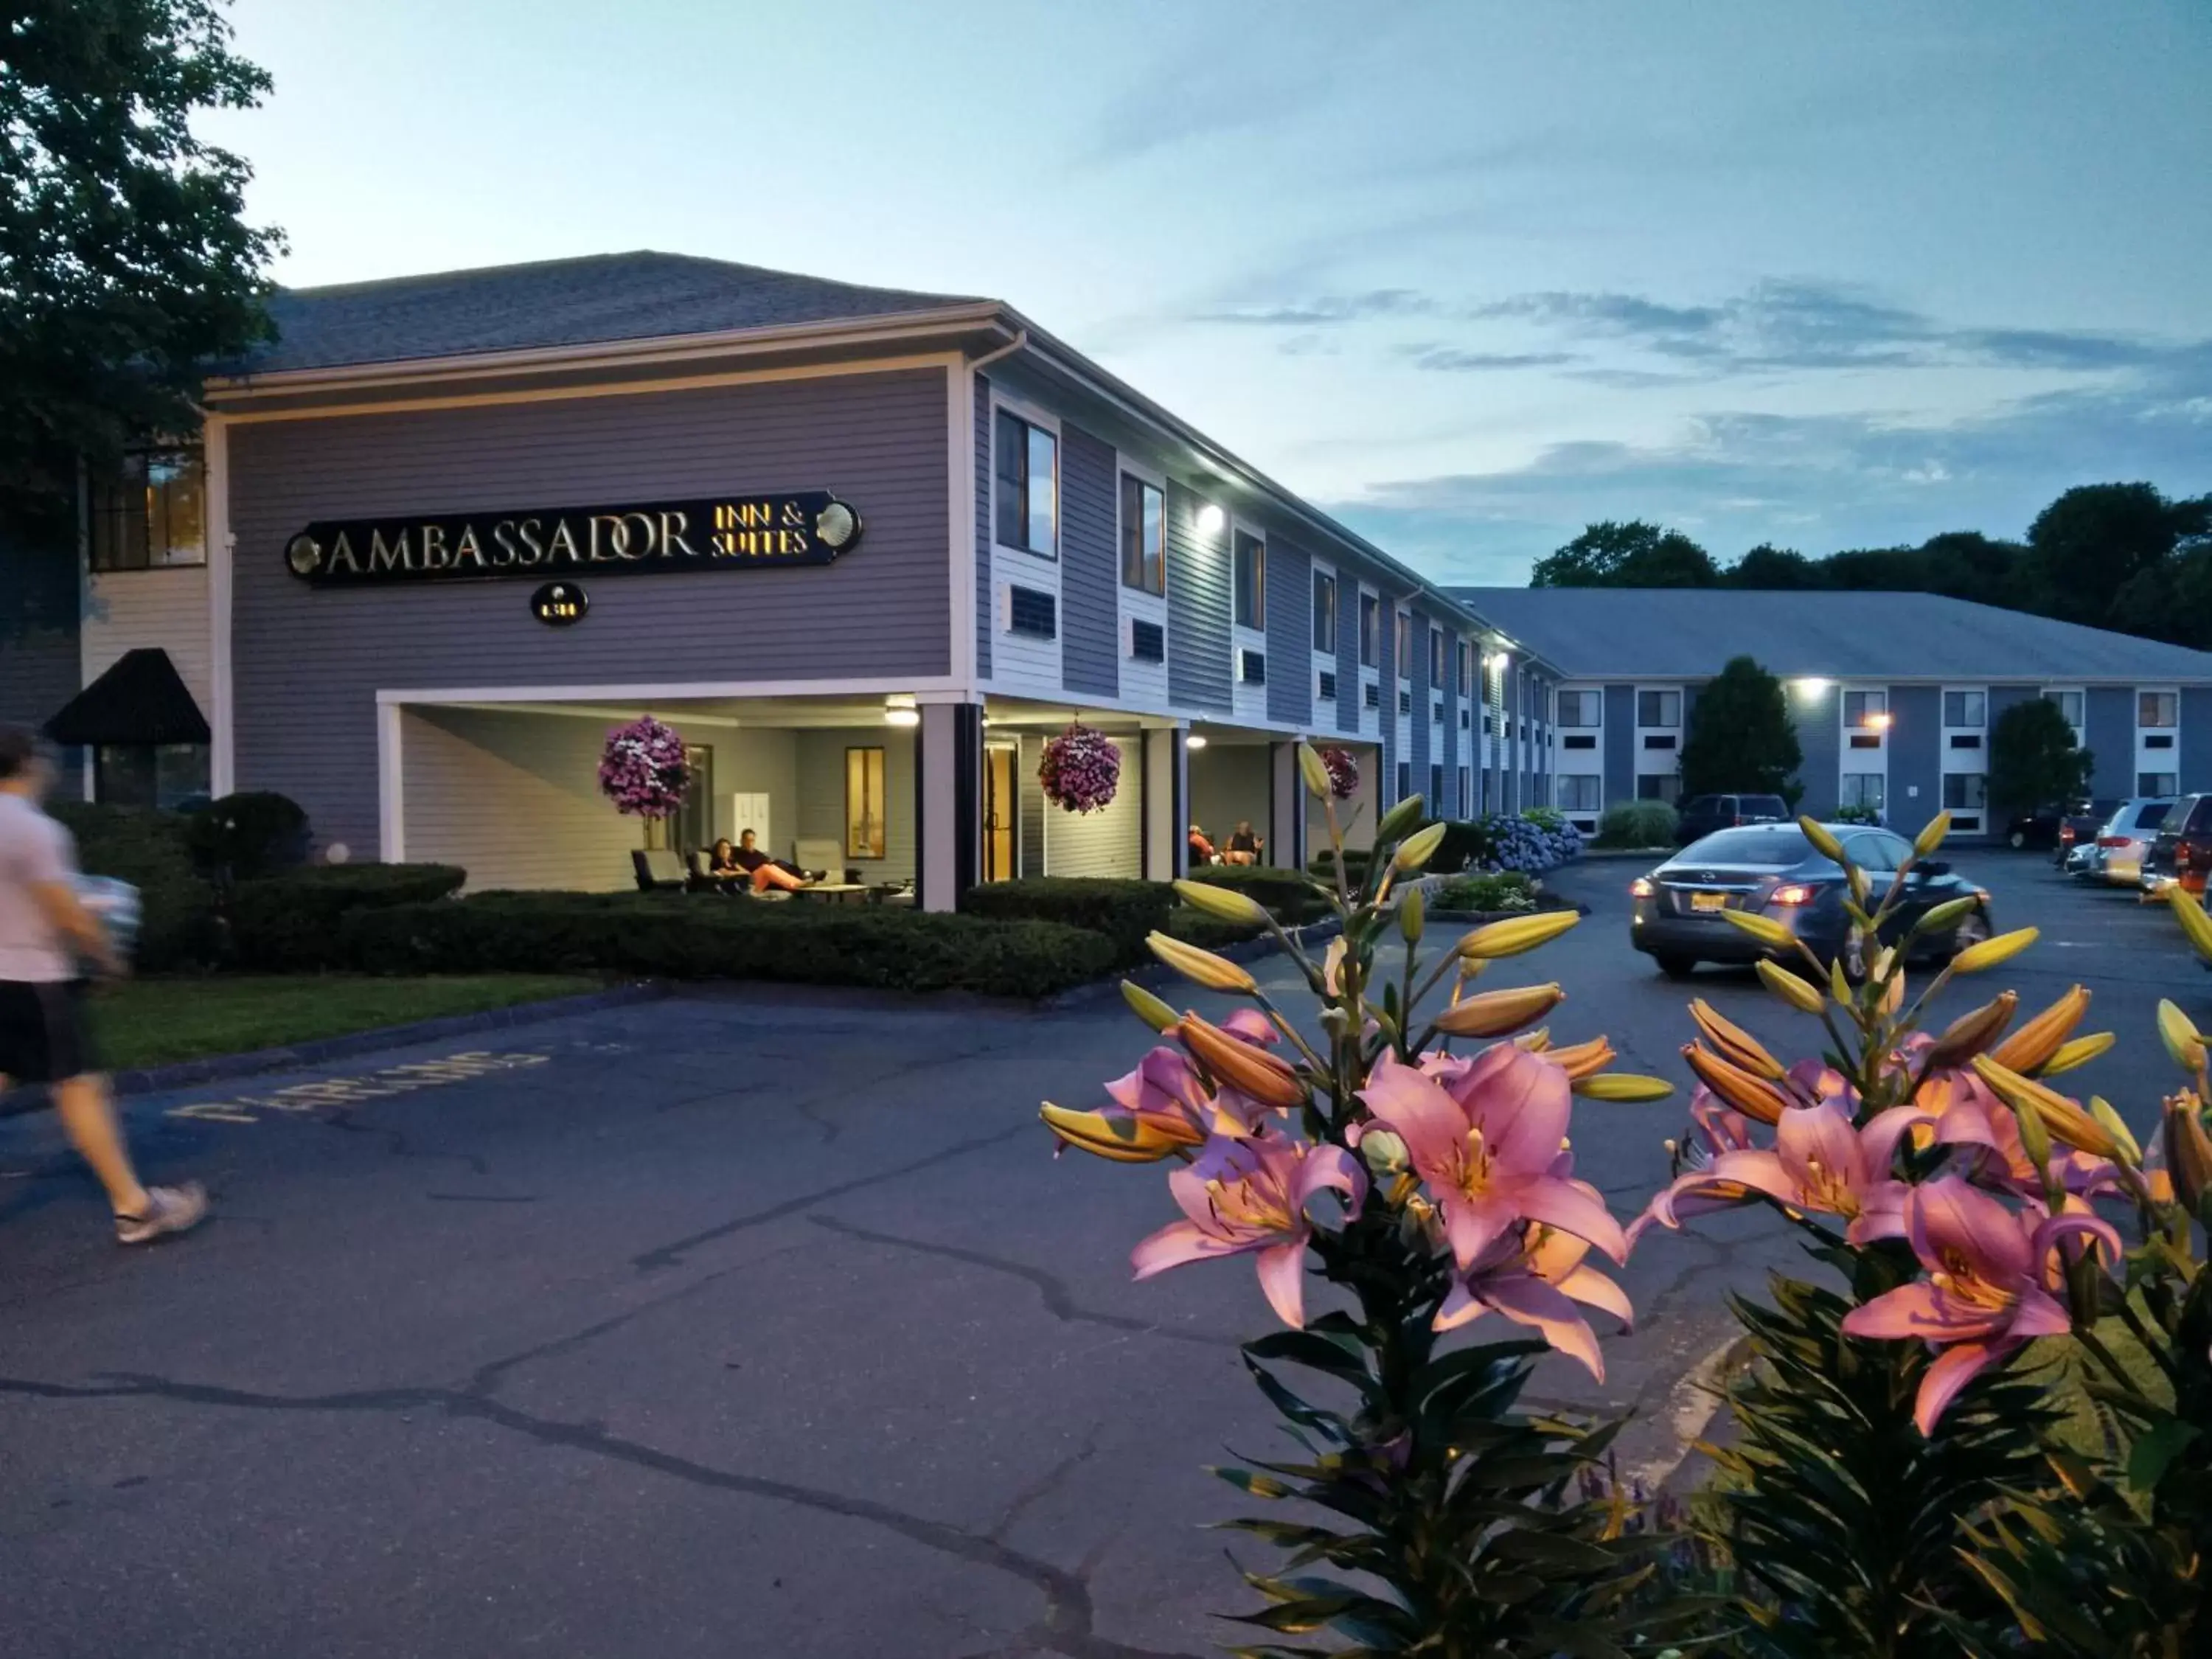 Property Building in Ambassador Inn and Suites